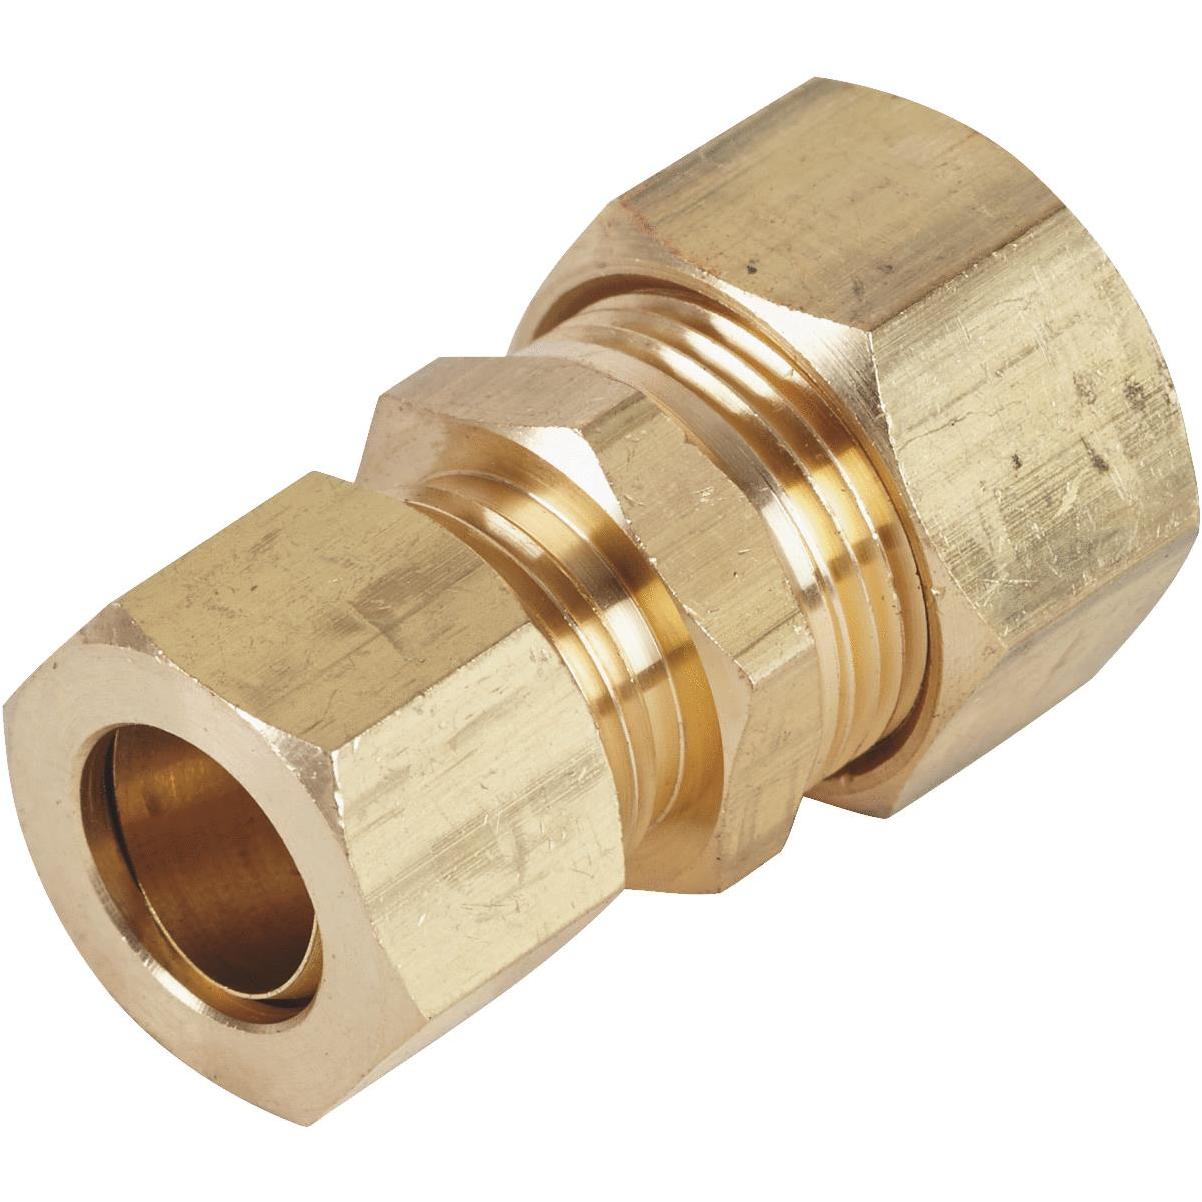 Anderson Metals 1/2 In. x 3/8 In. Reducing Hex Red Brass Nipple